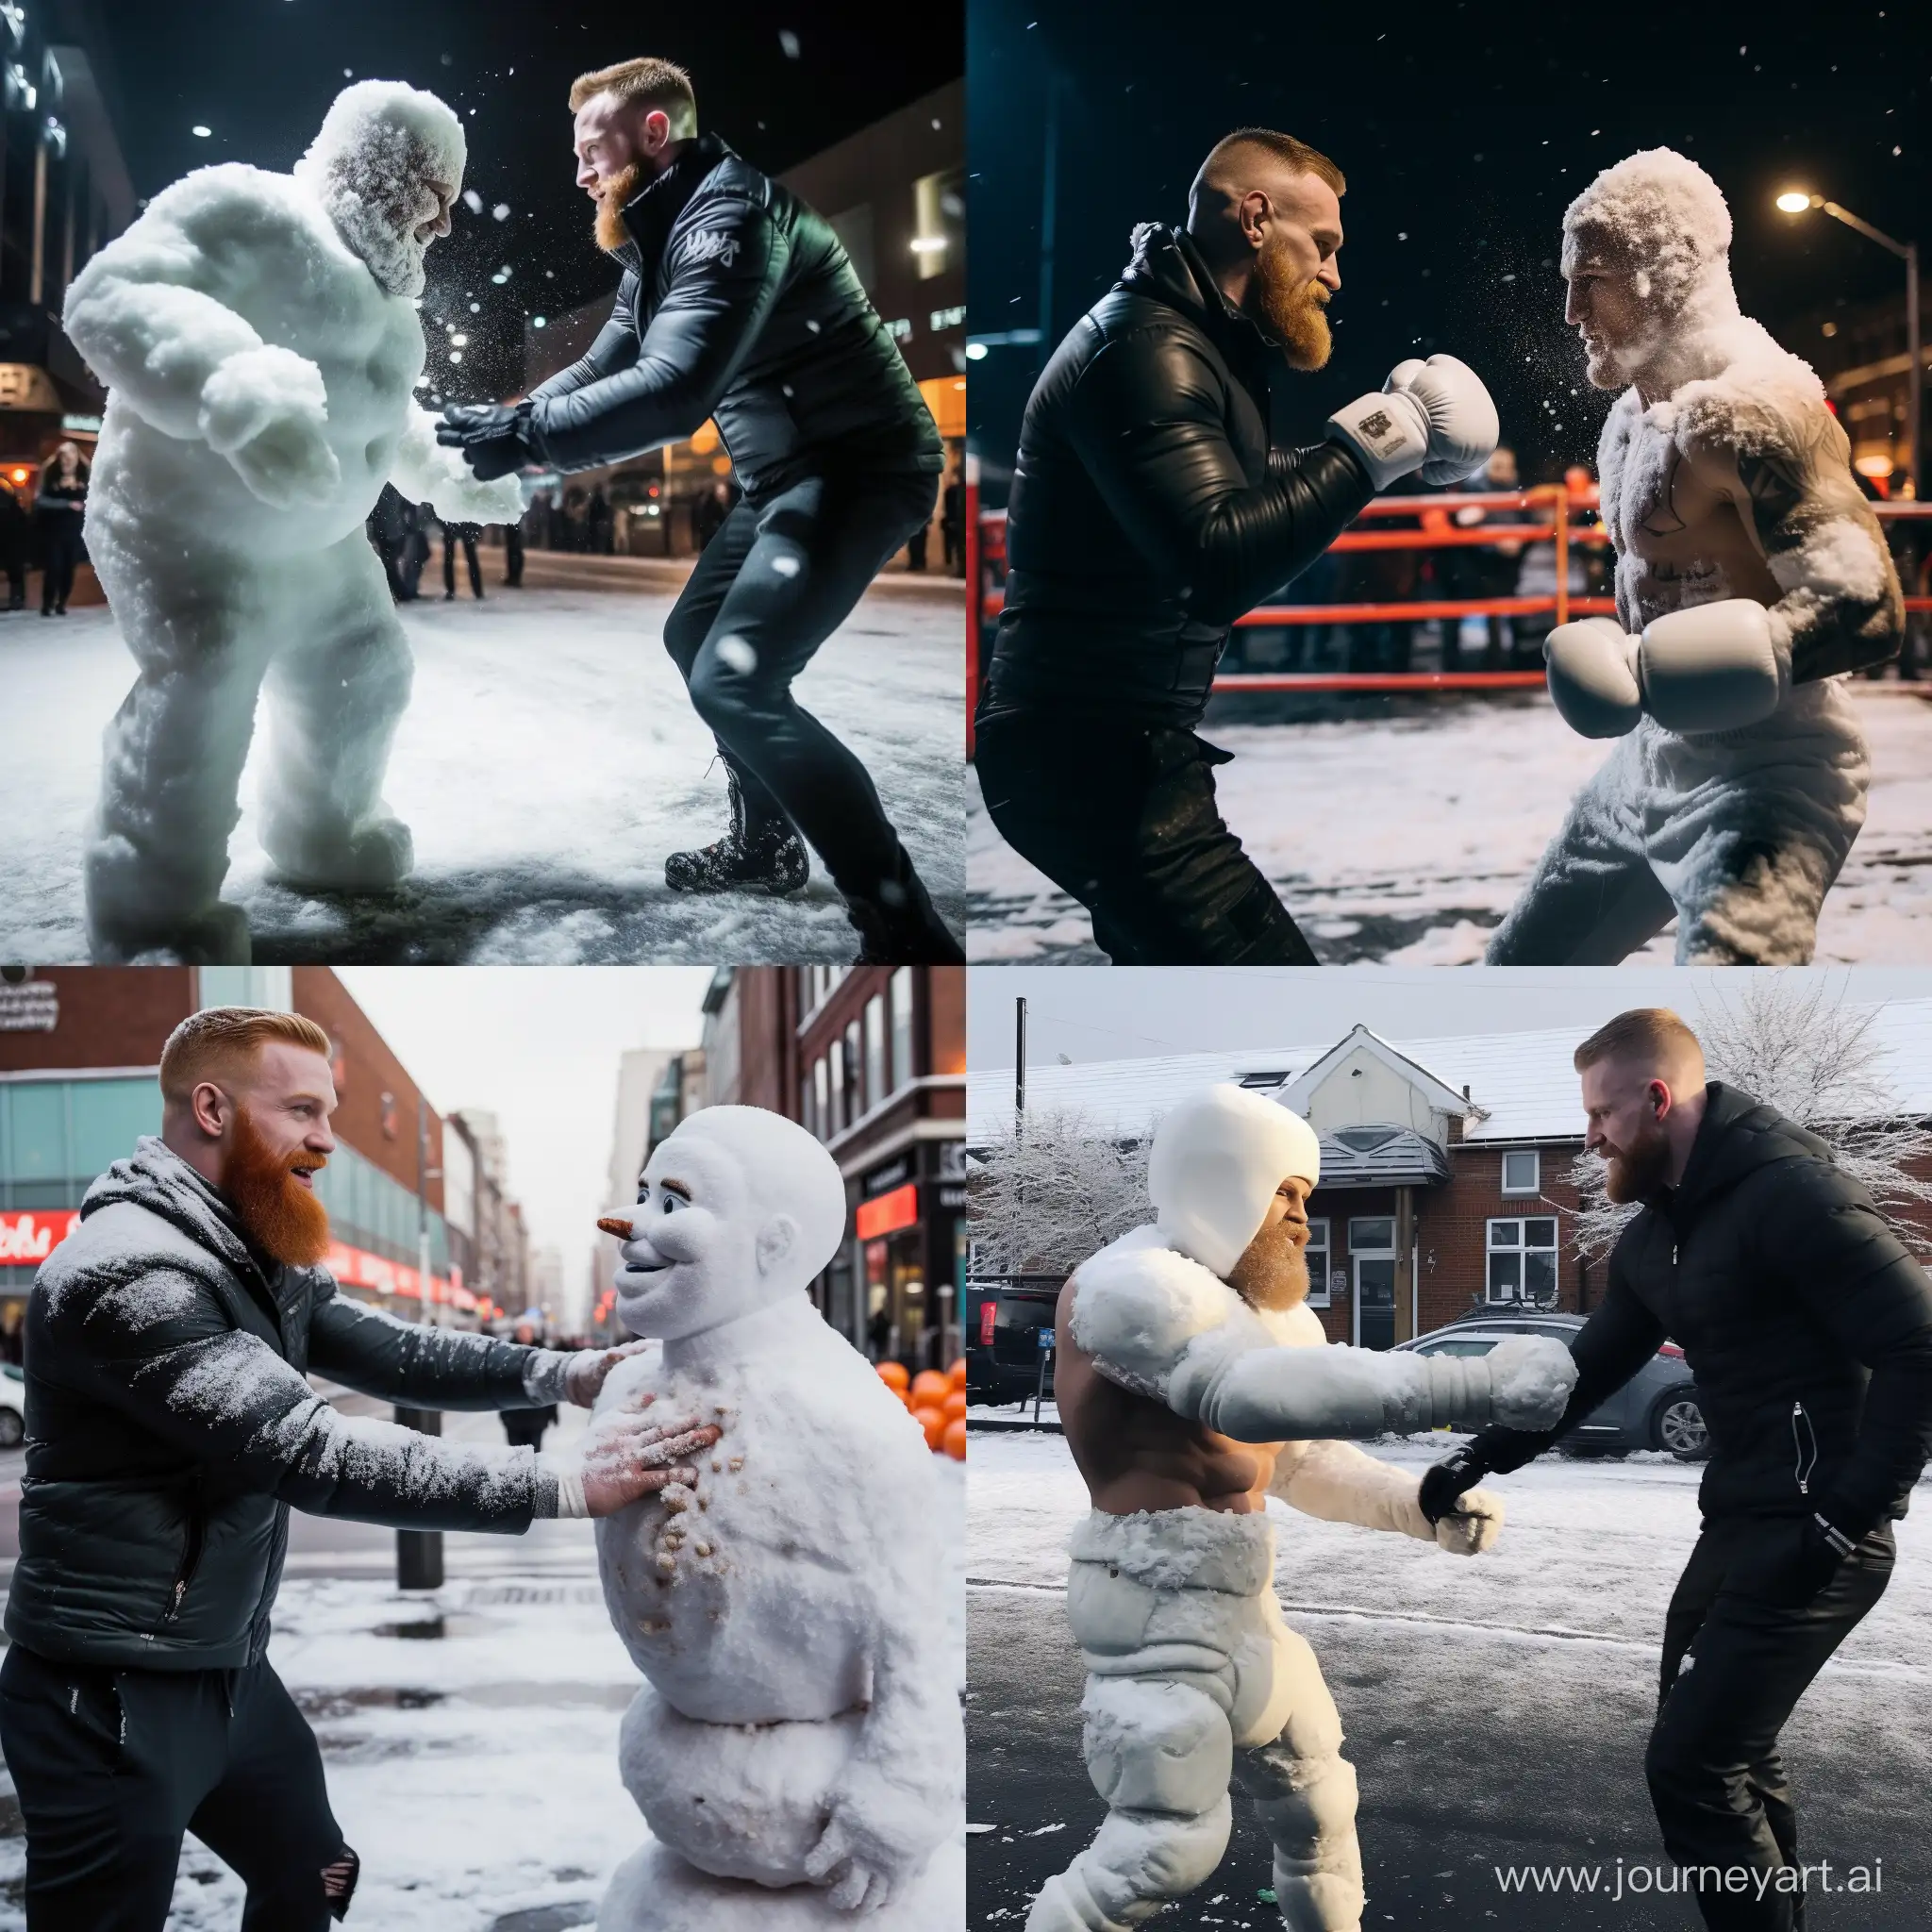 Conor McGregor fights with a snowman wearing gloves and the snowman hits Conor's head on the street at night